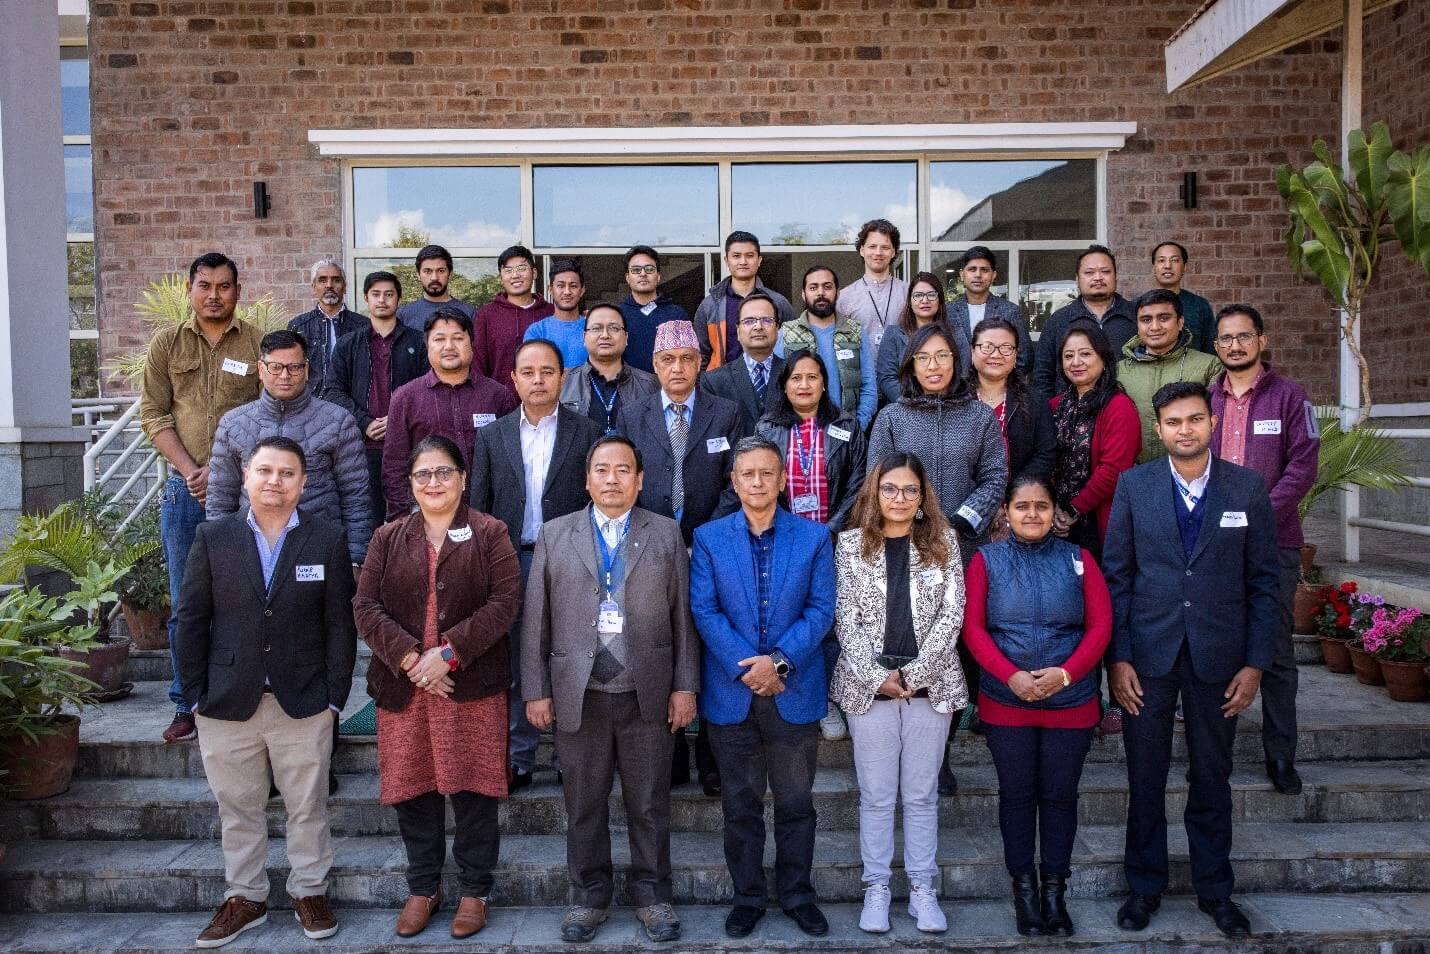 partners and relevant stakeholders working on landslide studies and disaster risk reduction in Nepal joined NASA GSFC officials